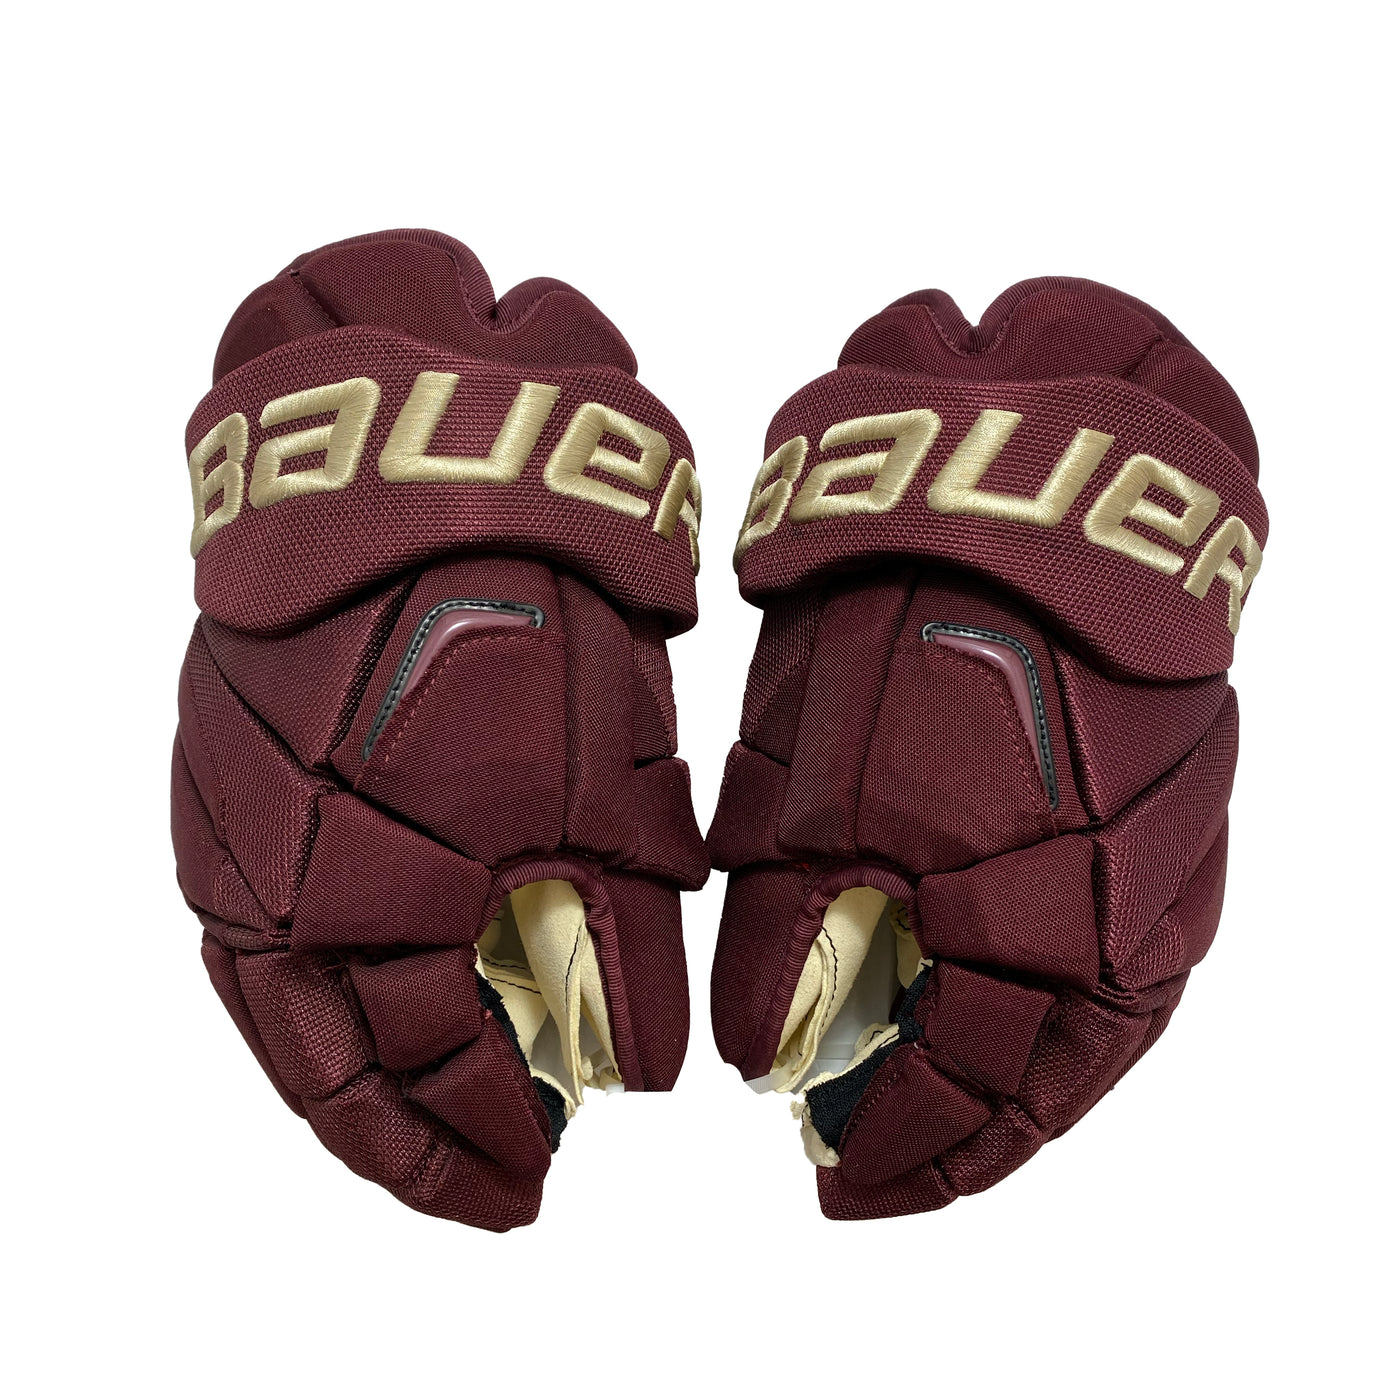 Bauer Vapor APX2 Pro - Vancouver Canucks 2014 Heritage Classic - Pro Stock Gloves - Luca Sbisa